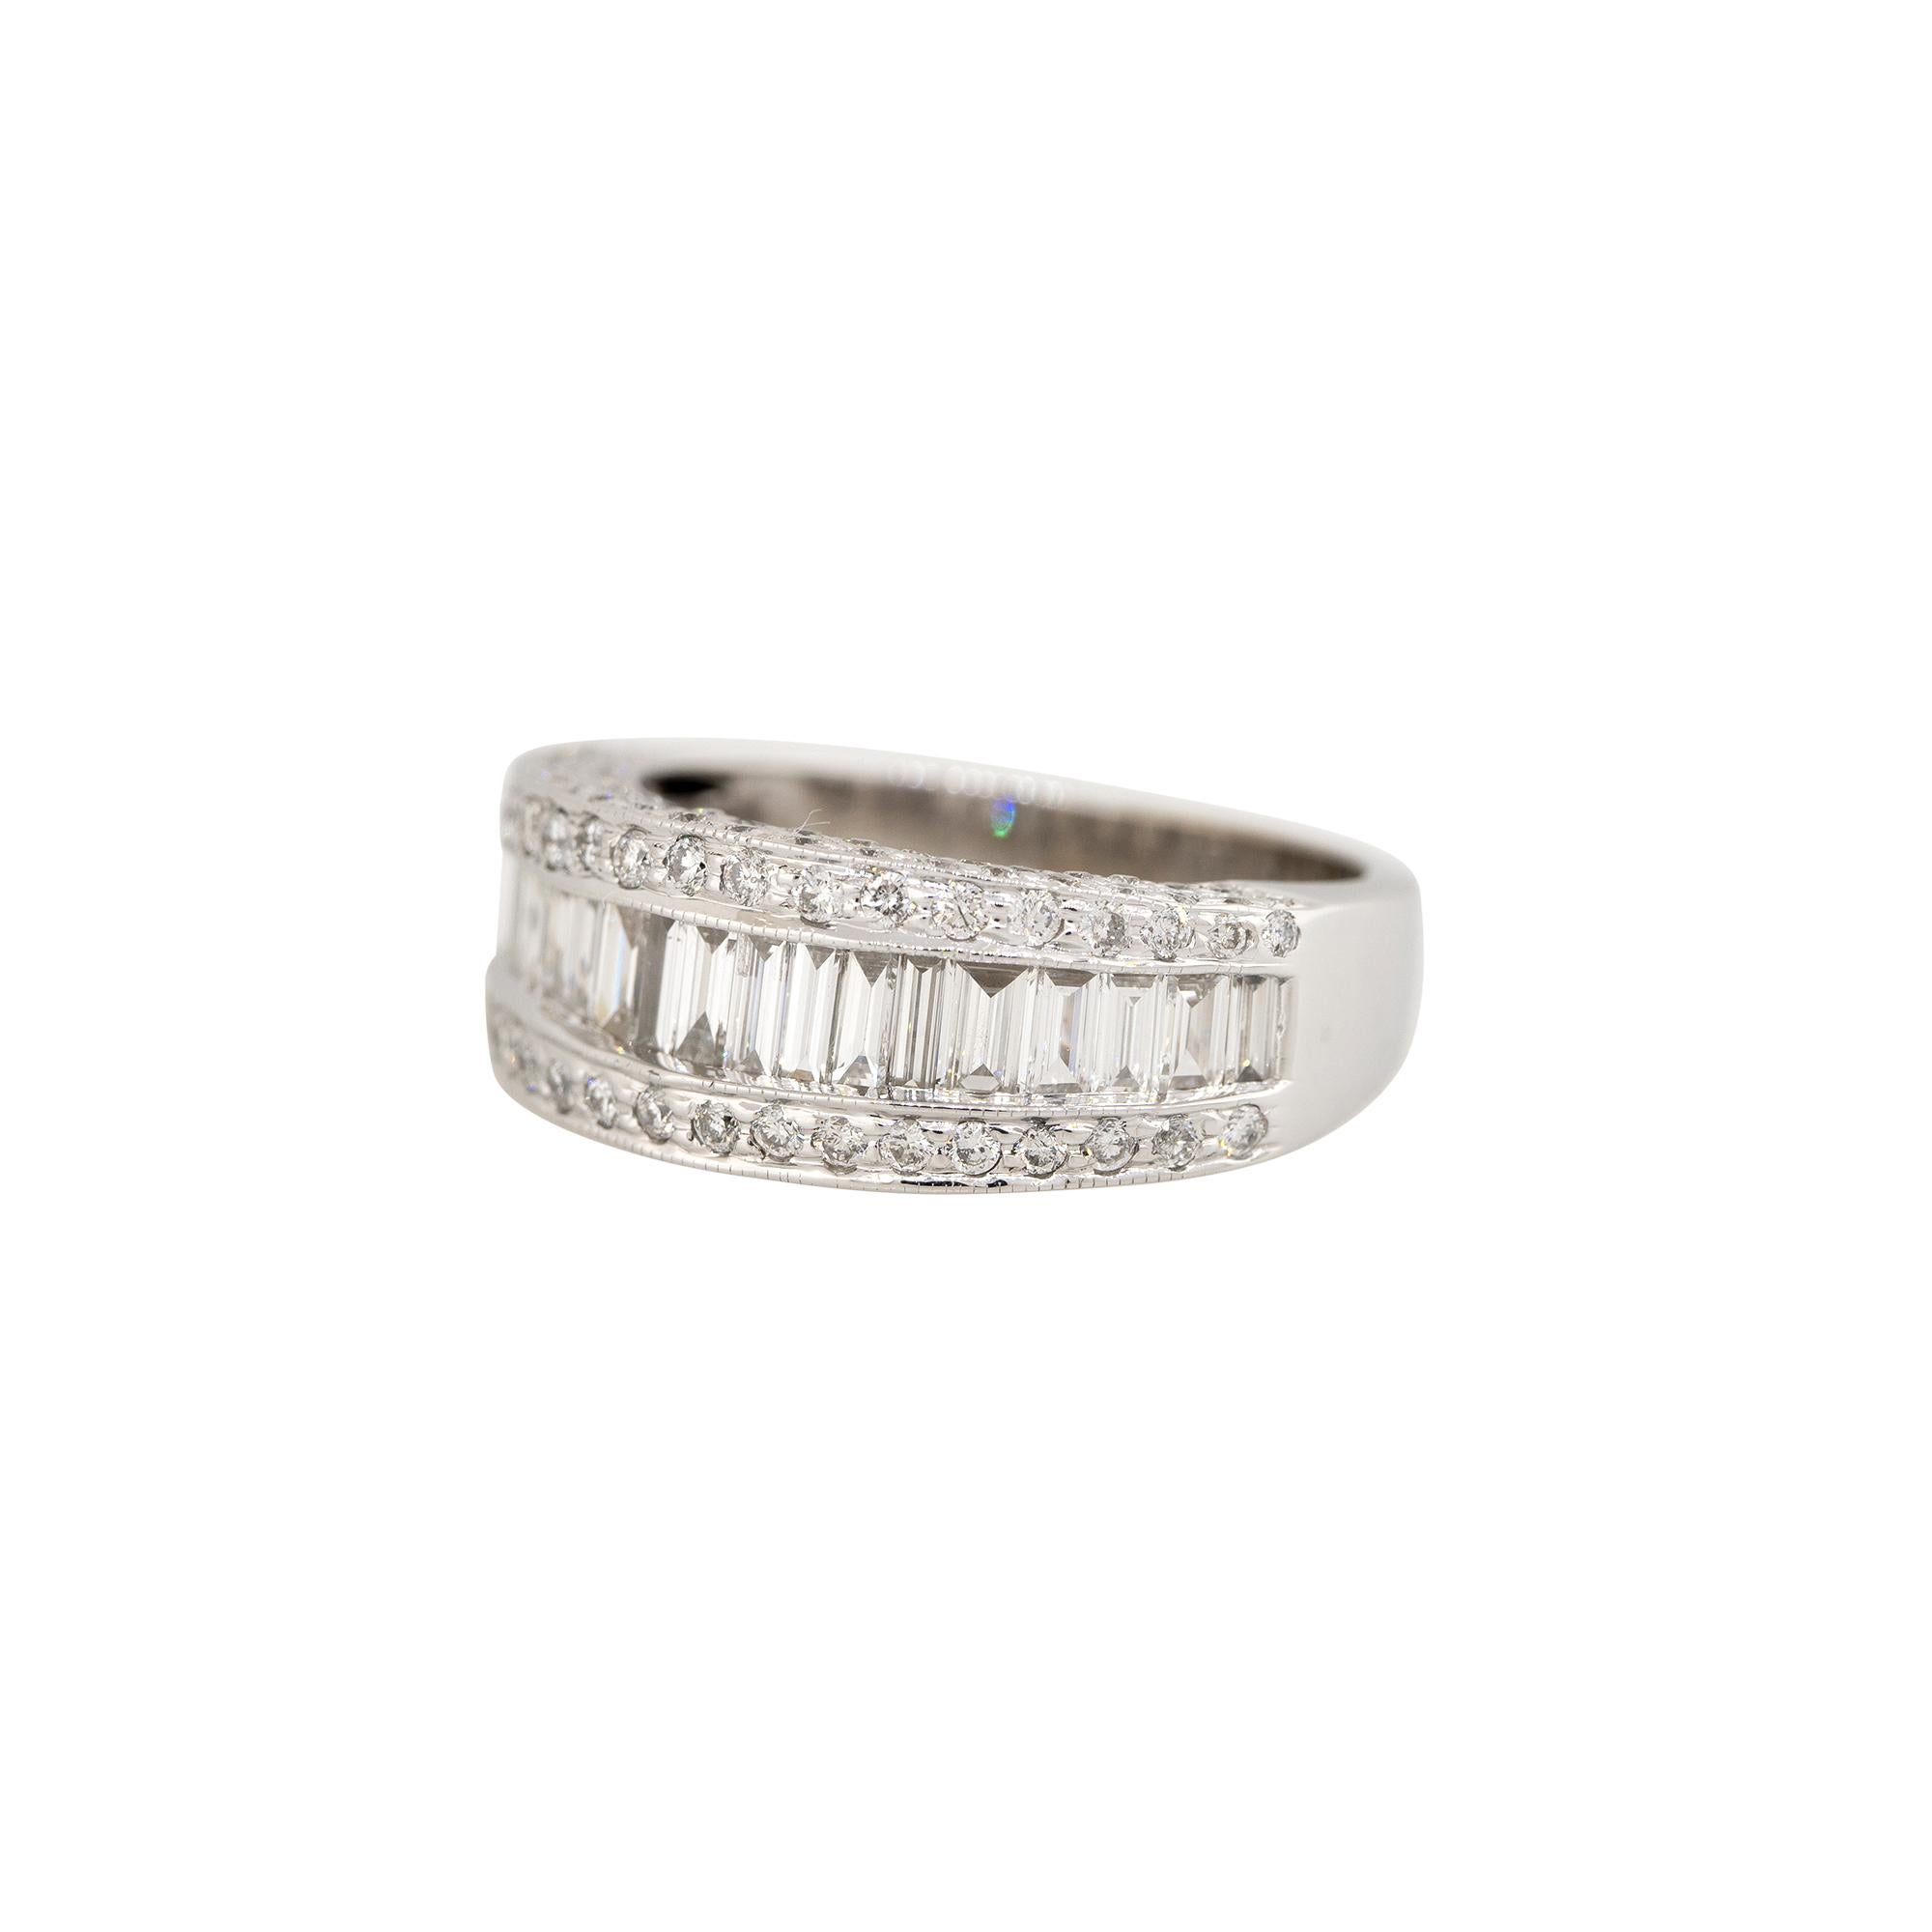 14k White Gold 1.7ctw Round Brilliant & Baguette Cut Diamond 3-Row Ring

Product: Round Brilliant & Baguette Cut Diamond Ring
Material: 14k White Gold
Diamond Details: There are approximately 1.70 carats of round brilliant and baguette cut